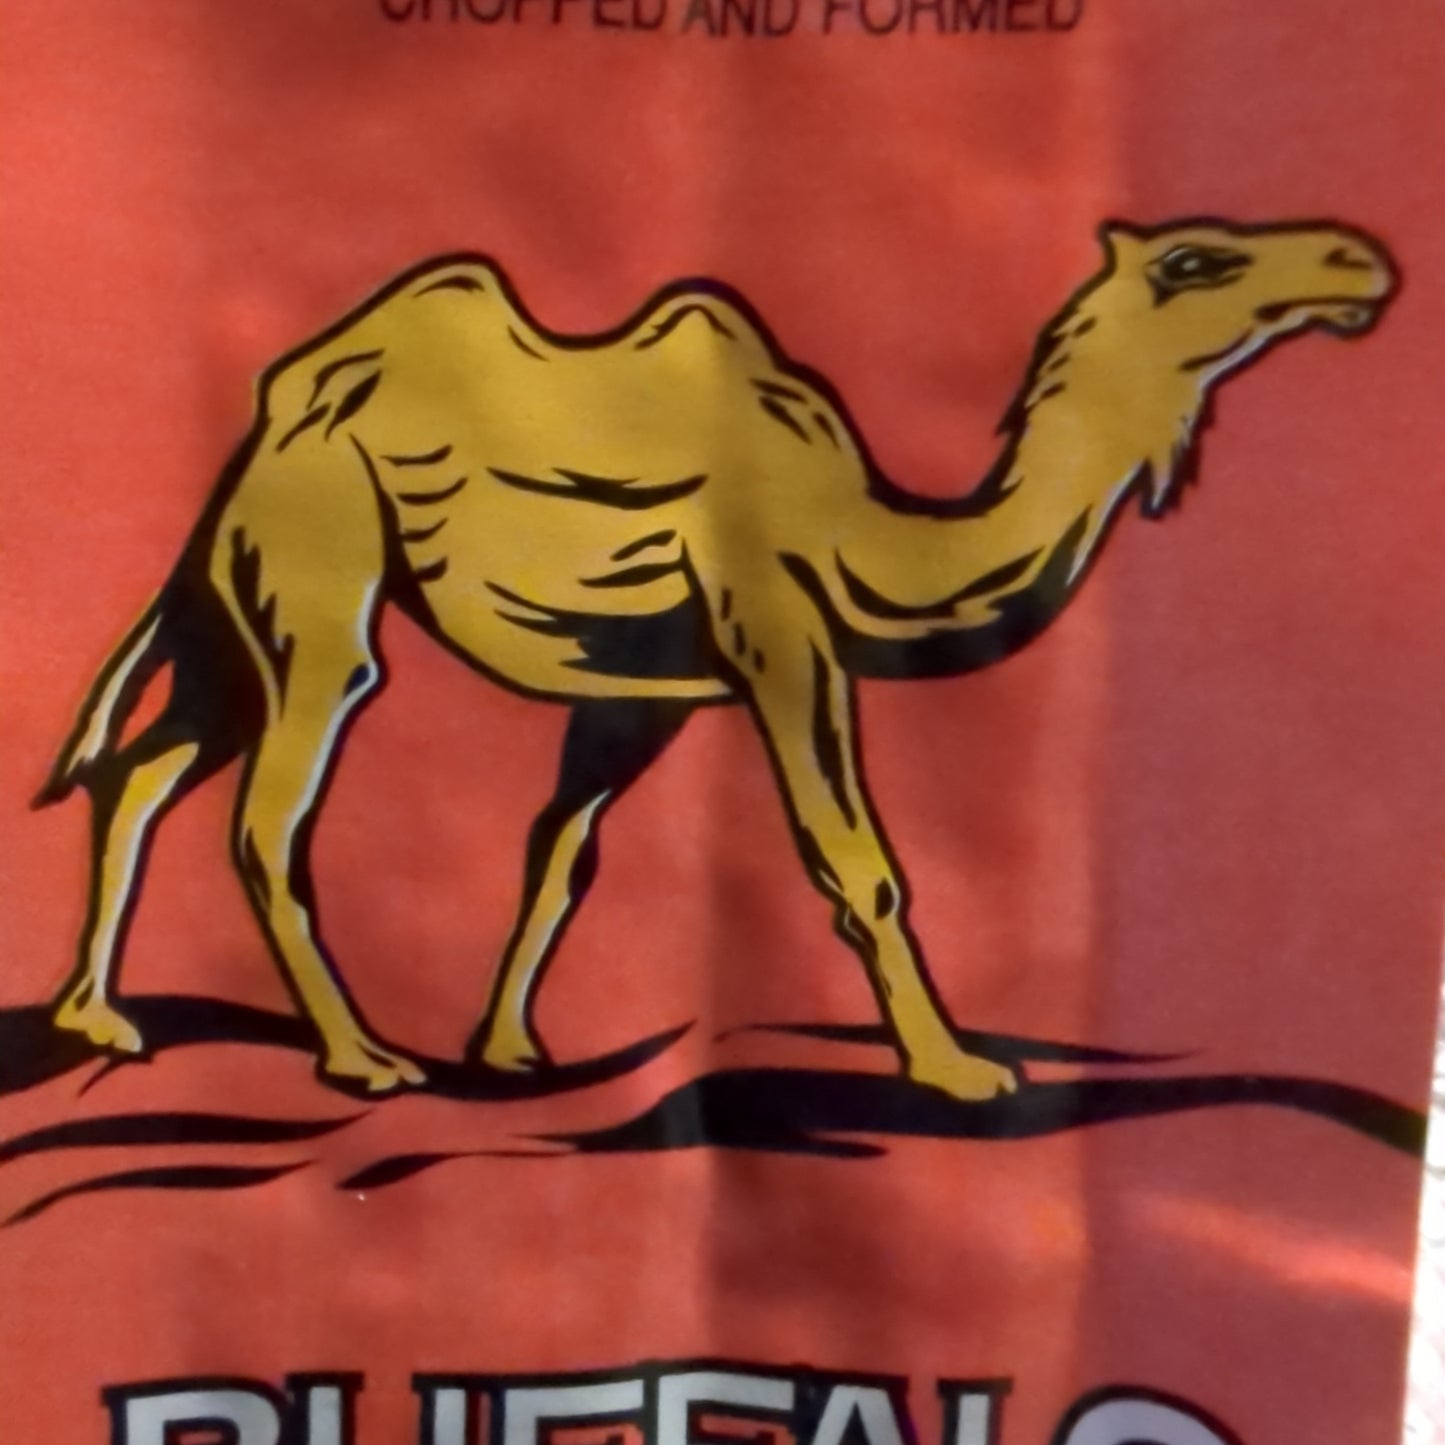 Camel with Beef Jerky Meat Stick